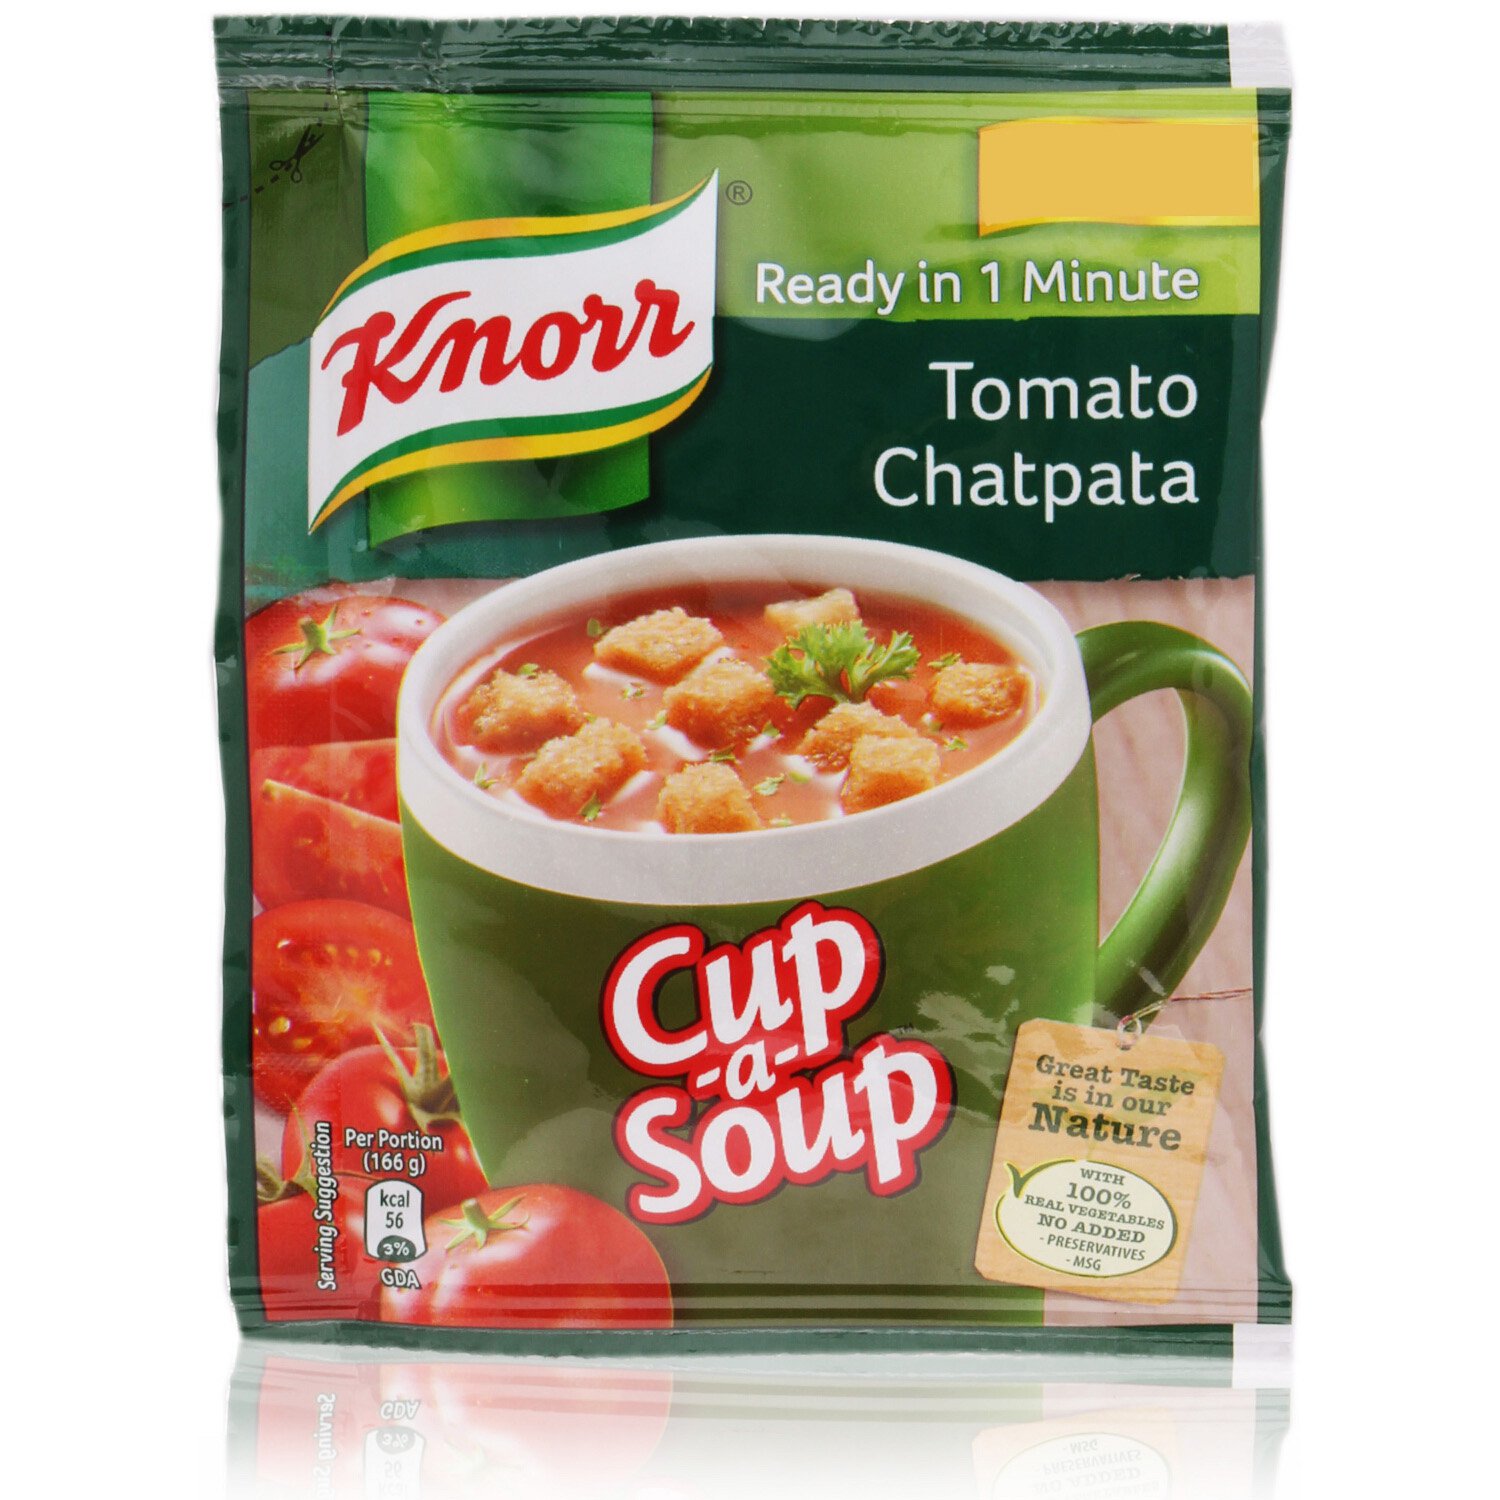 Knorr Soup - Tomato Chatpata